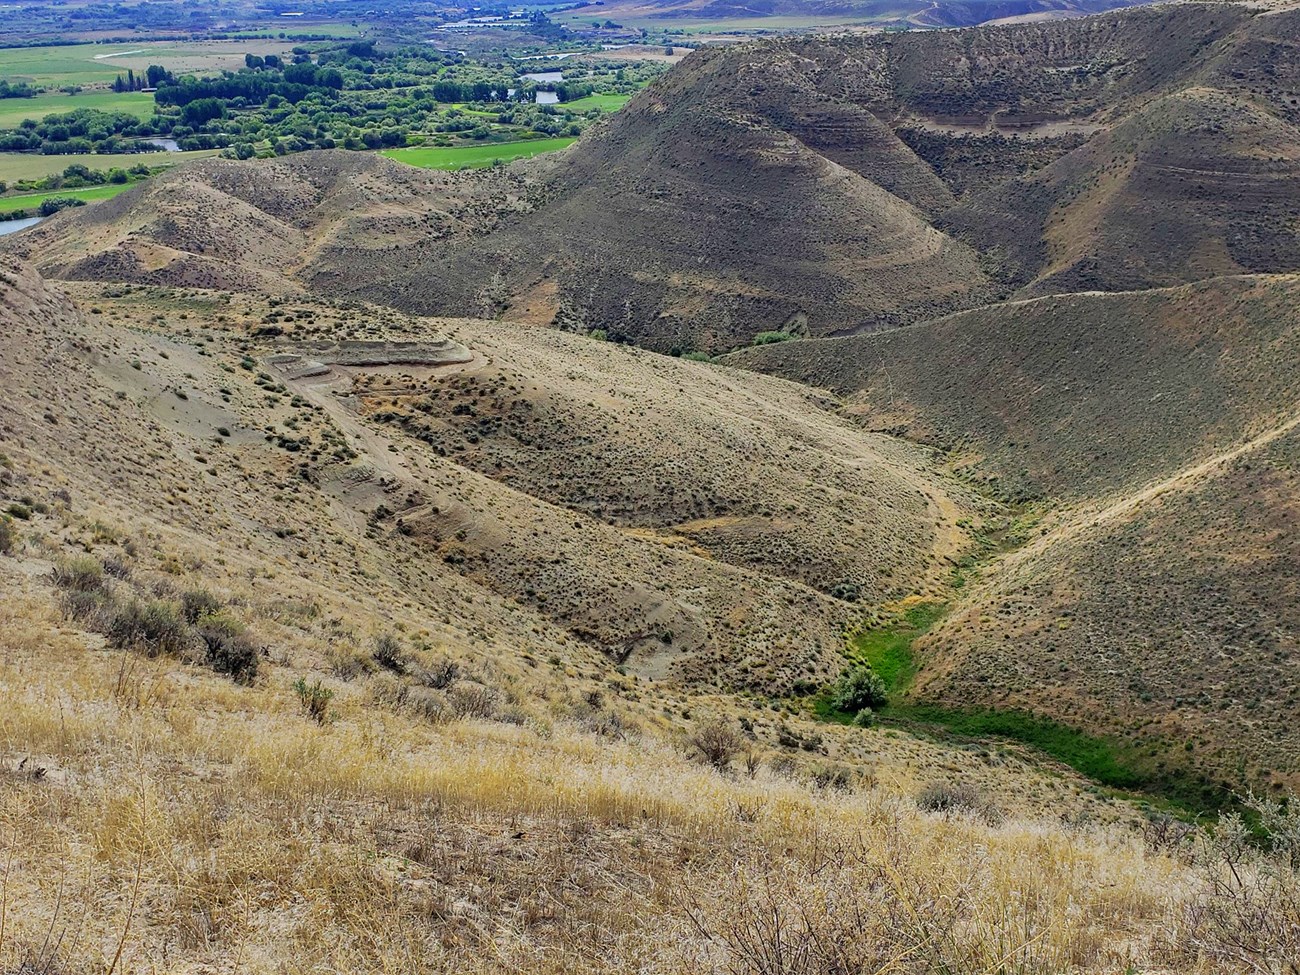 From the Ashes: how volcanologists can help paleontologists reconstruct the  ancient past at Hagerman Fossil Beds National Monument (. National Park  Service)